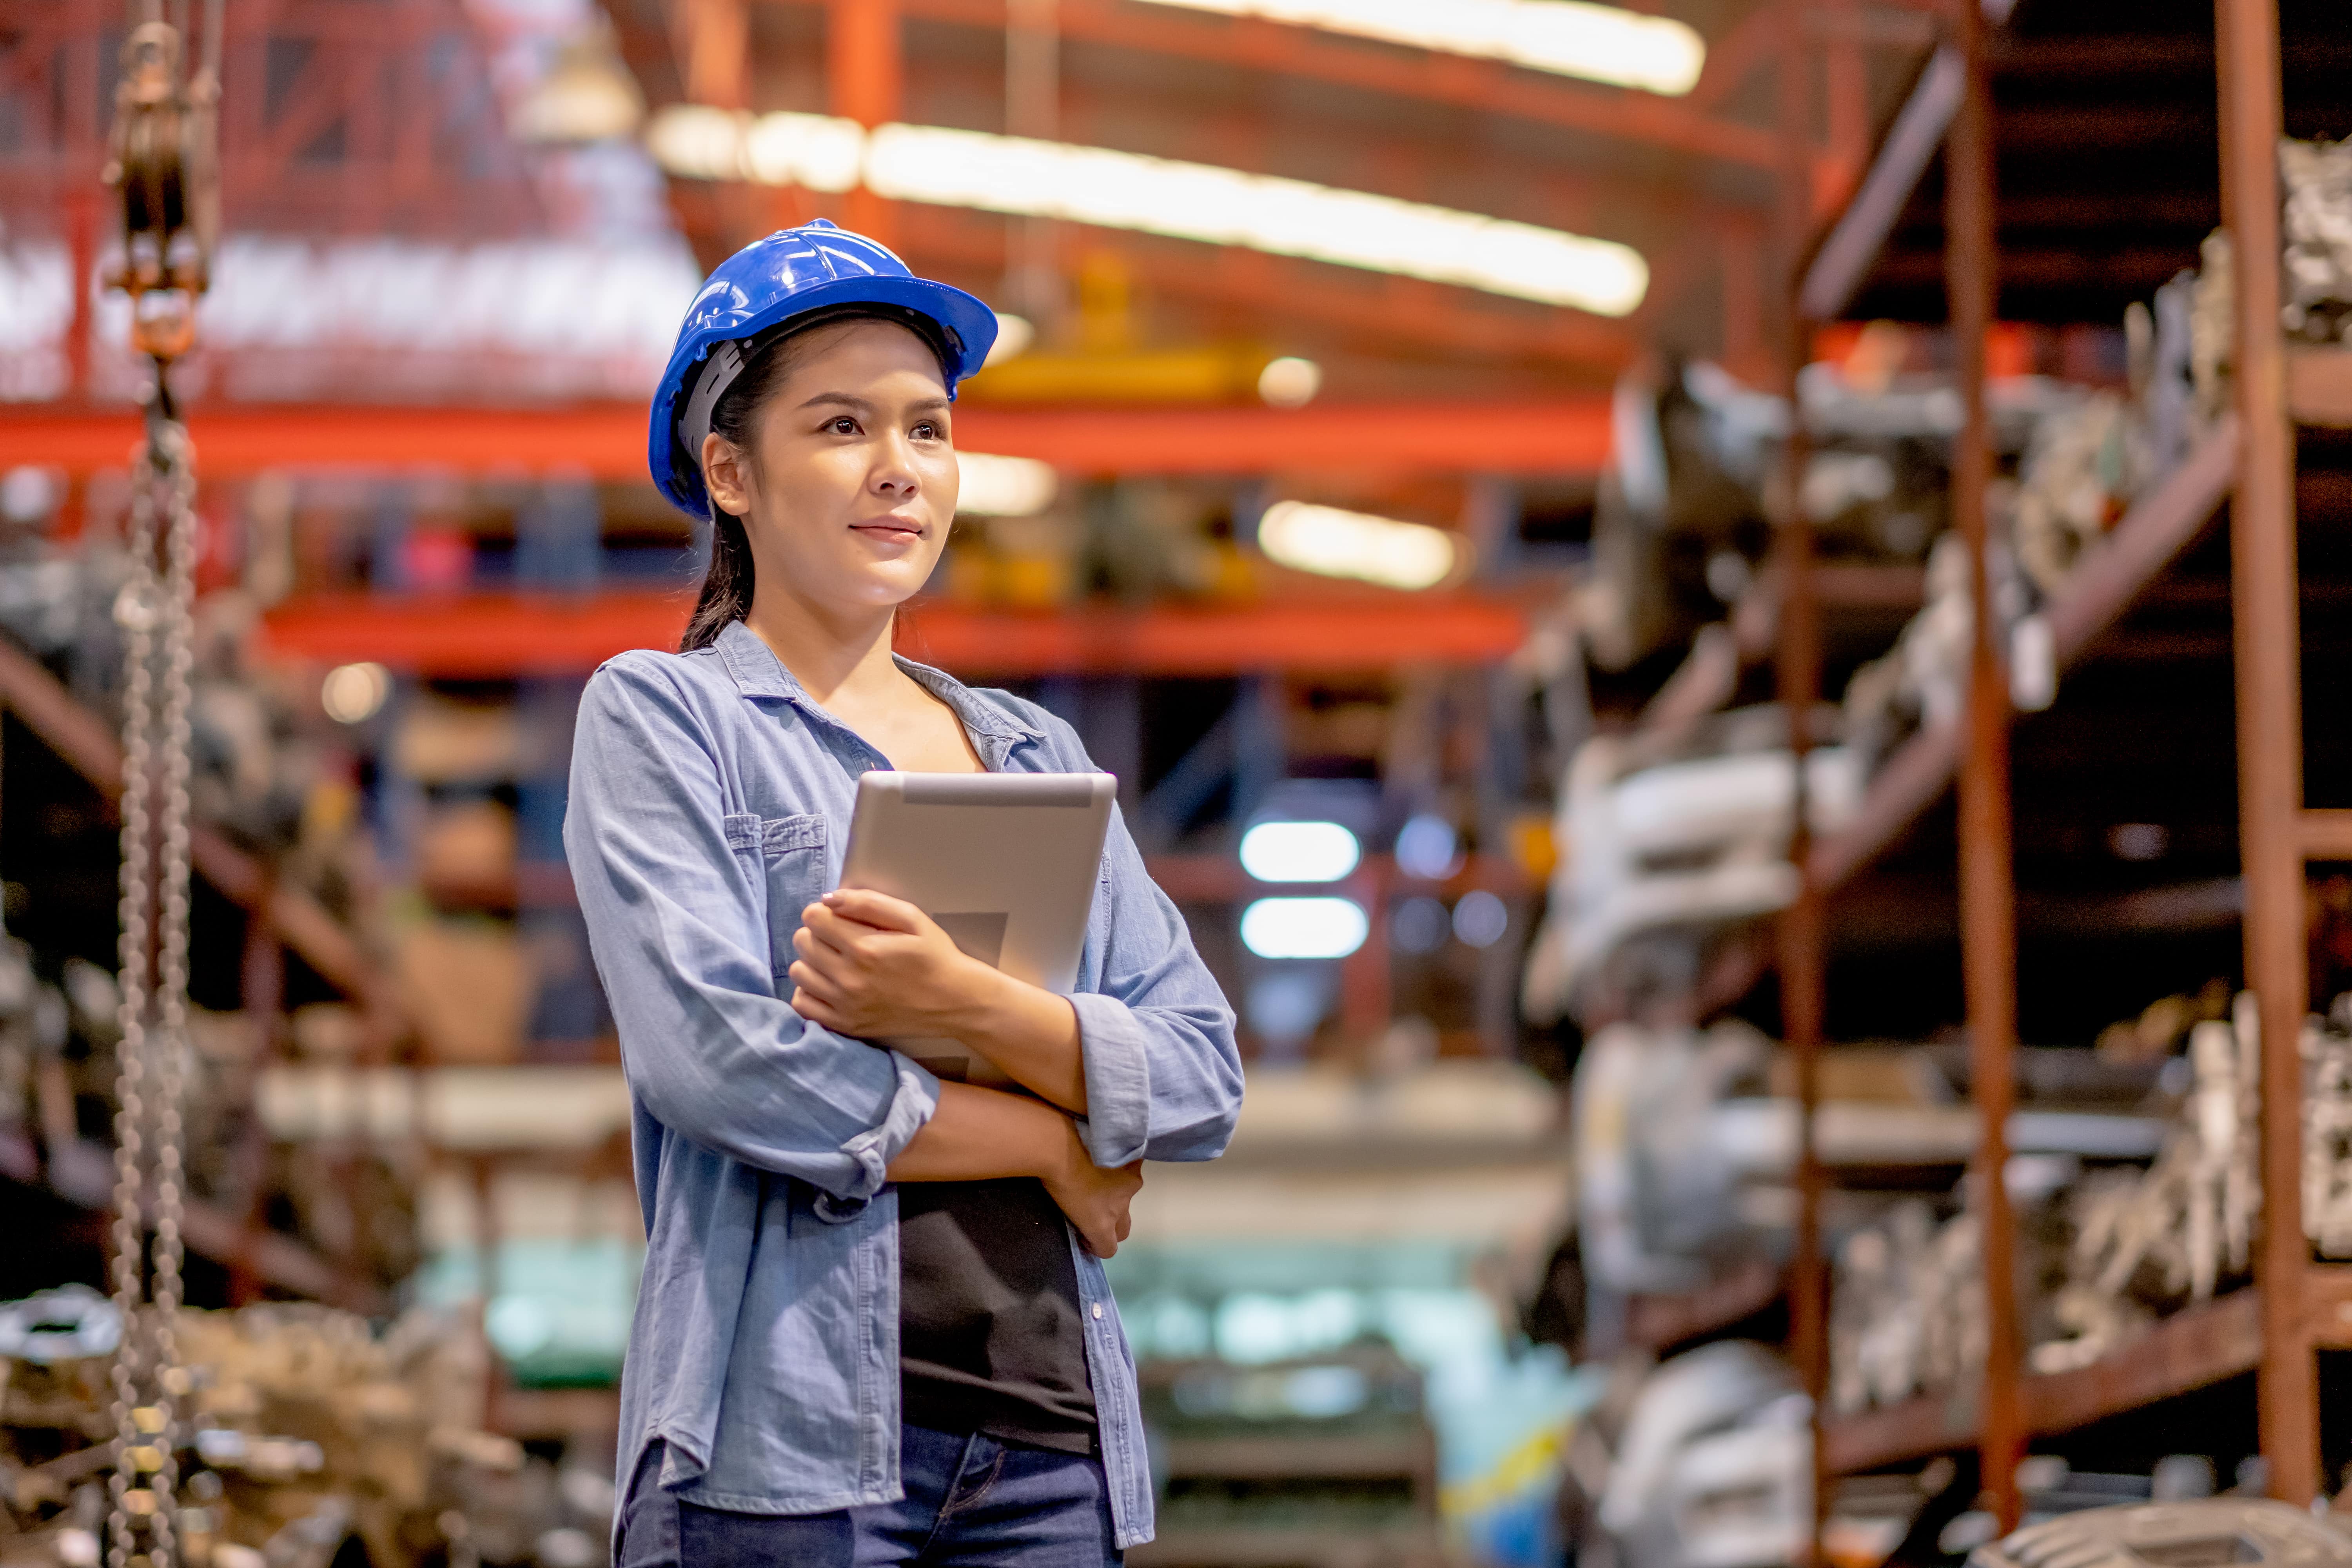 portrait-of-factory-worker-woman-with-blue-hardhat-2021-10-27-14-46-00-utc